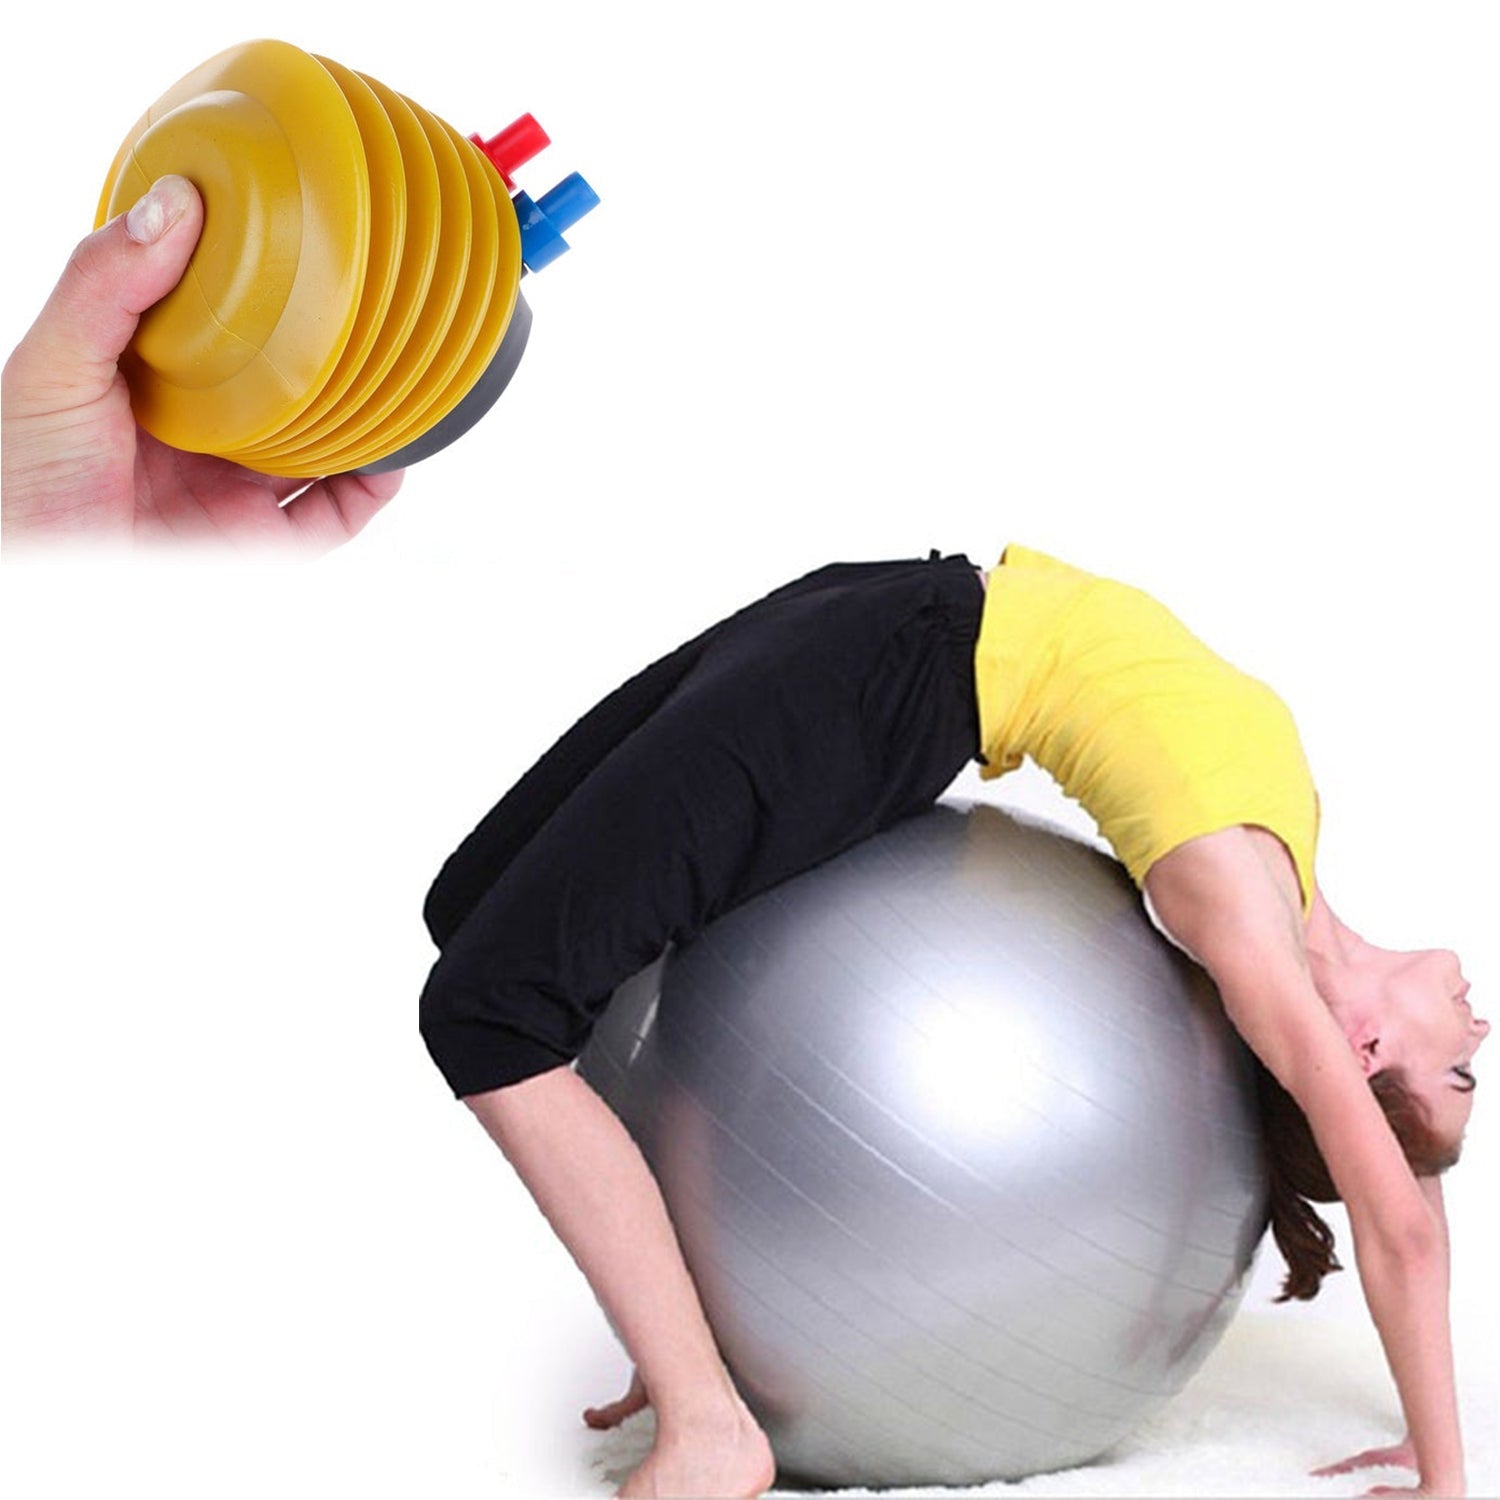 7428 Heavy Duty Gym Ball Non-Slip Stability Ball with Foot Pump for Total Body Fitness